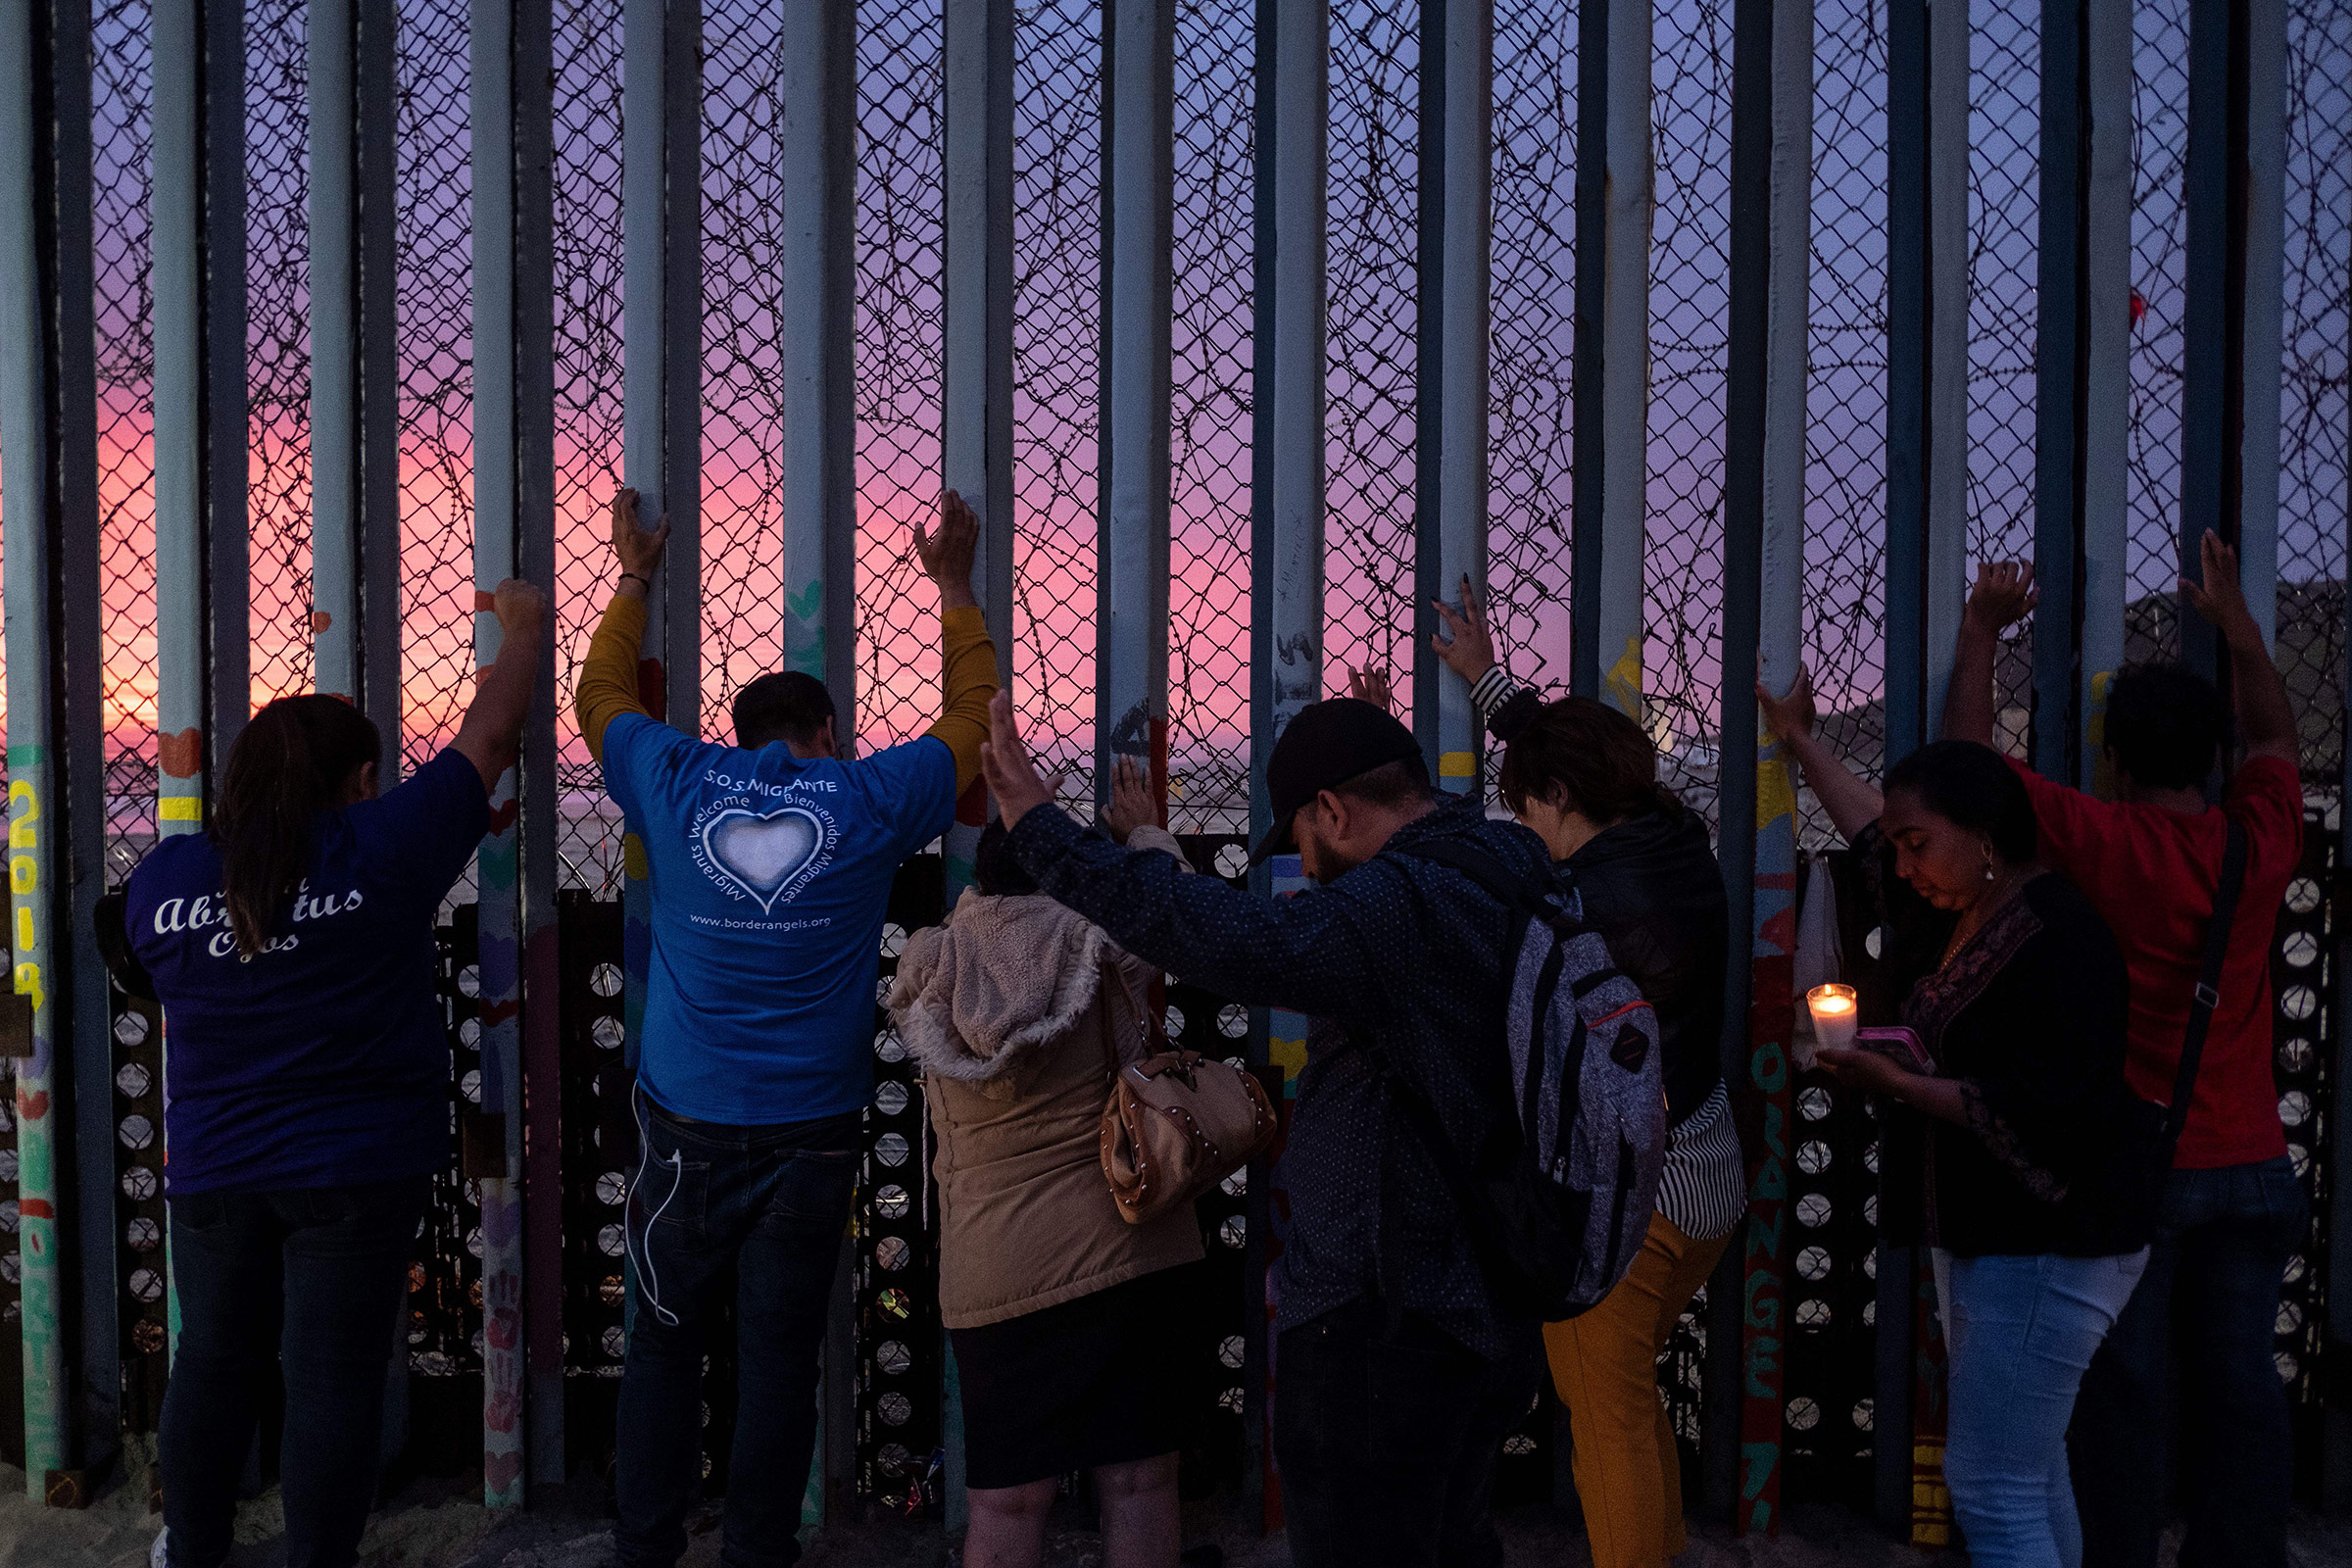 Migrants, advocates and attendees take part in an event called "Clamor for those who didn't achieve the dream" at the U.S.-Mexico border in Playas de Tijuana, Baja California state, Mexico, on June 29, 2019.